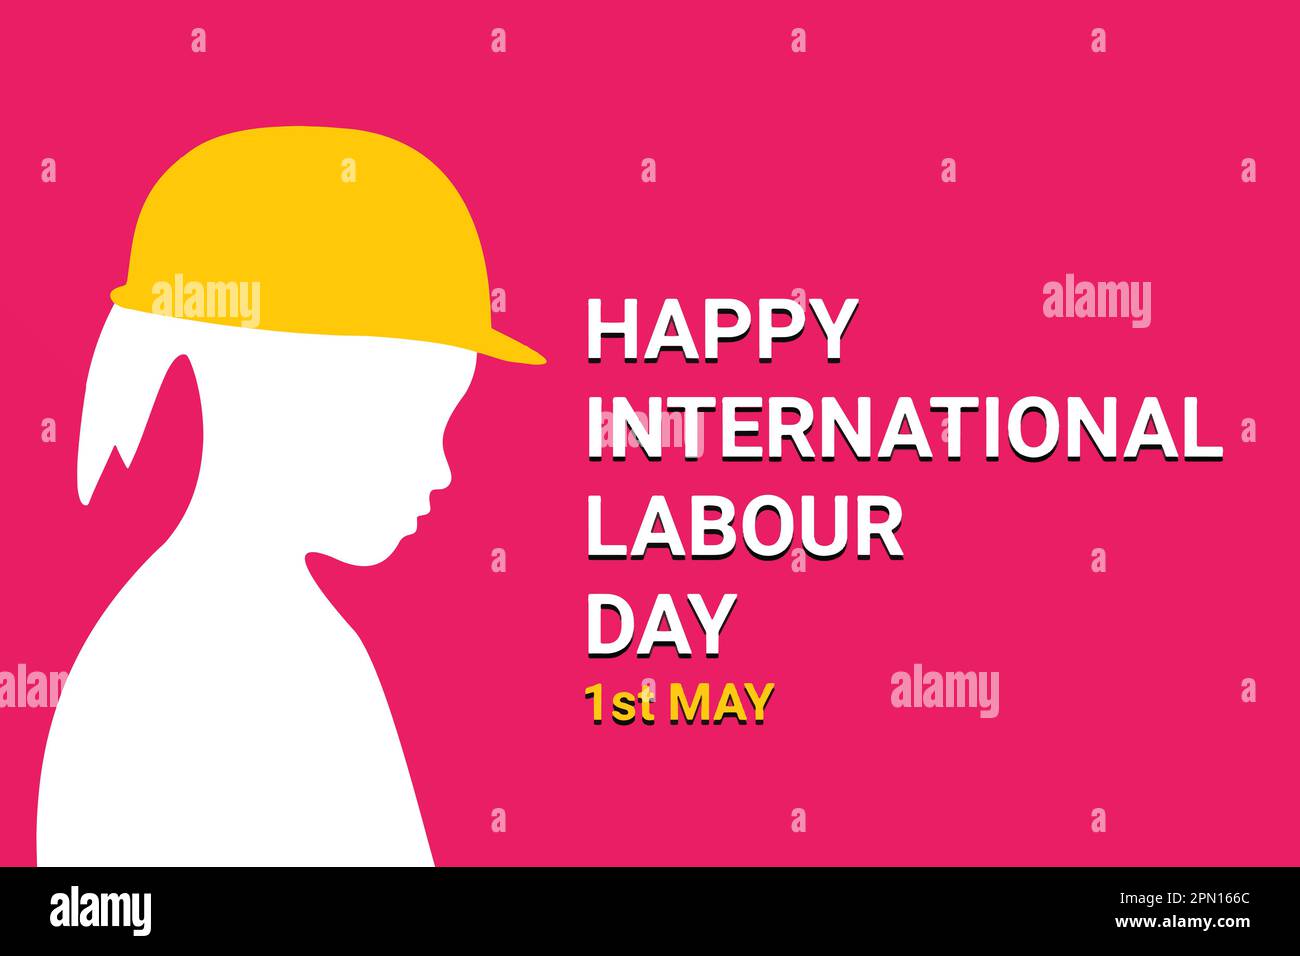 Happy International Labour Day. 1st May. Holiday concept. Template for background, banner, card, poster with text inscription. Stock Vector